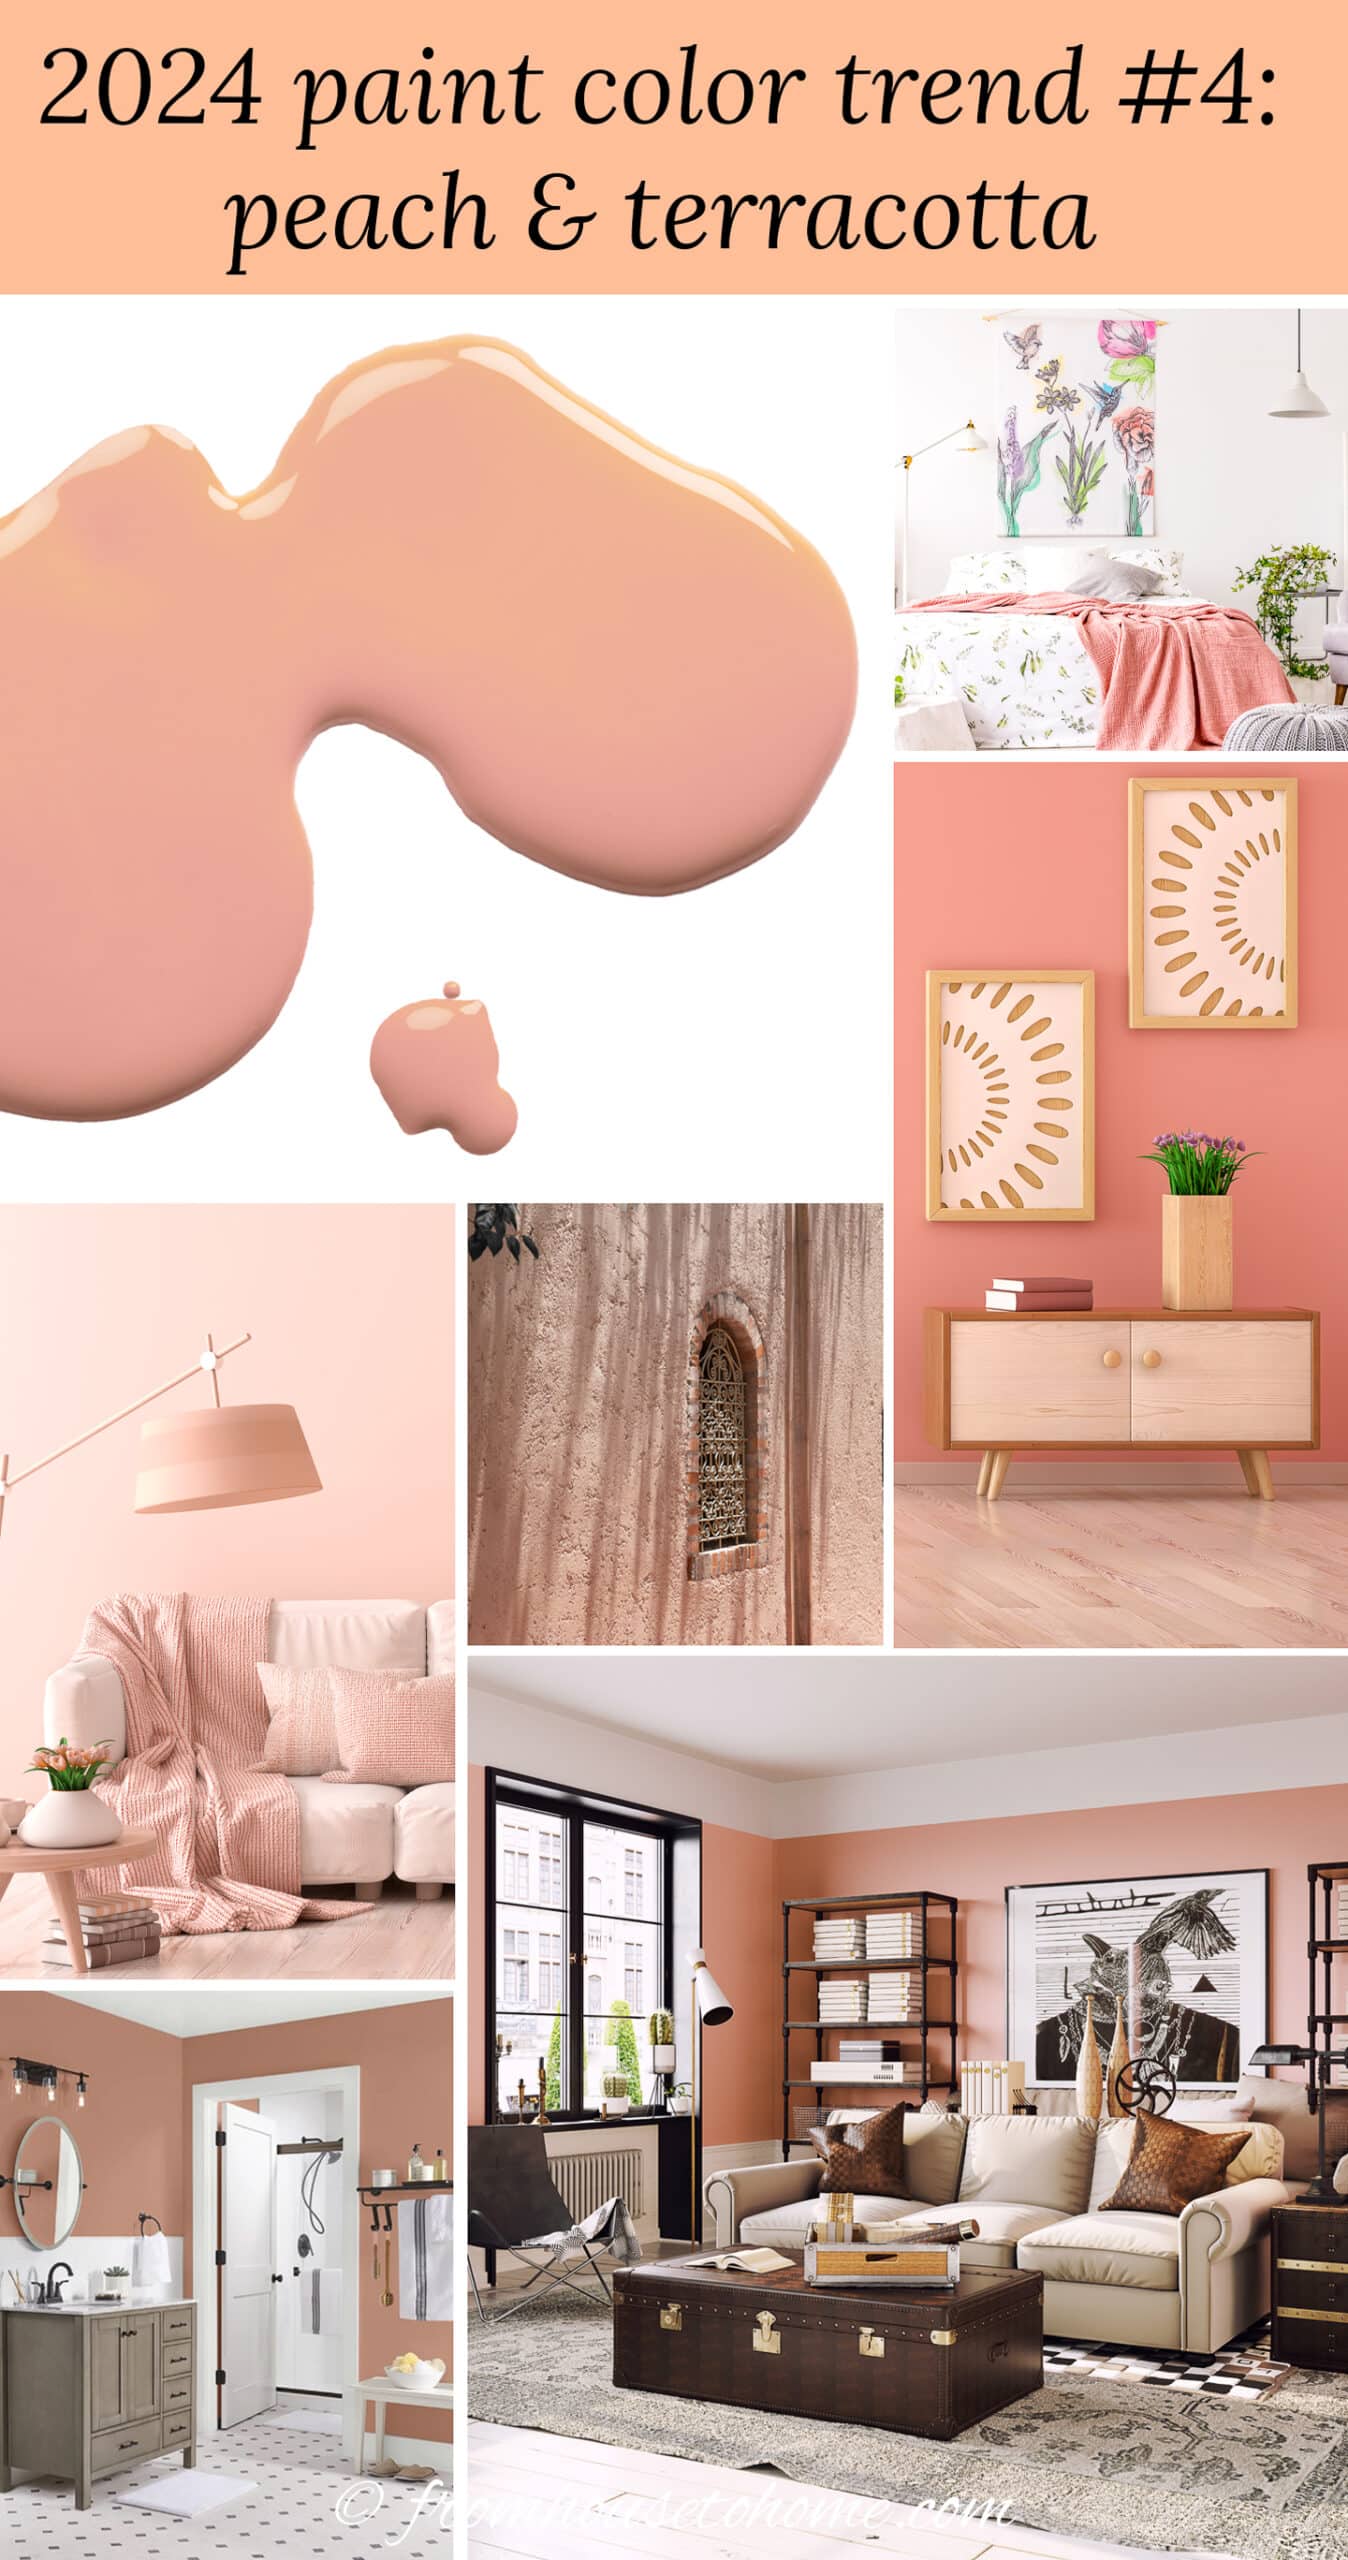 collage of peach and terracotta items representing 2024 paint color trends